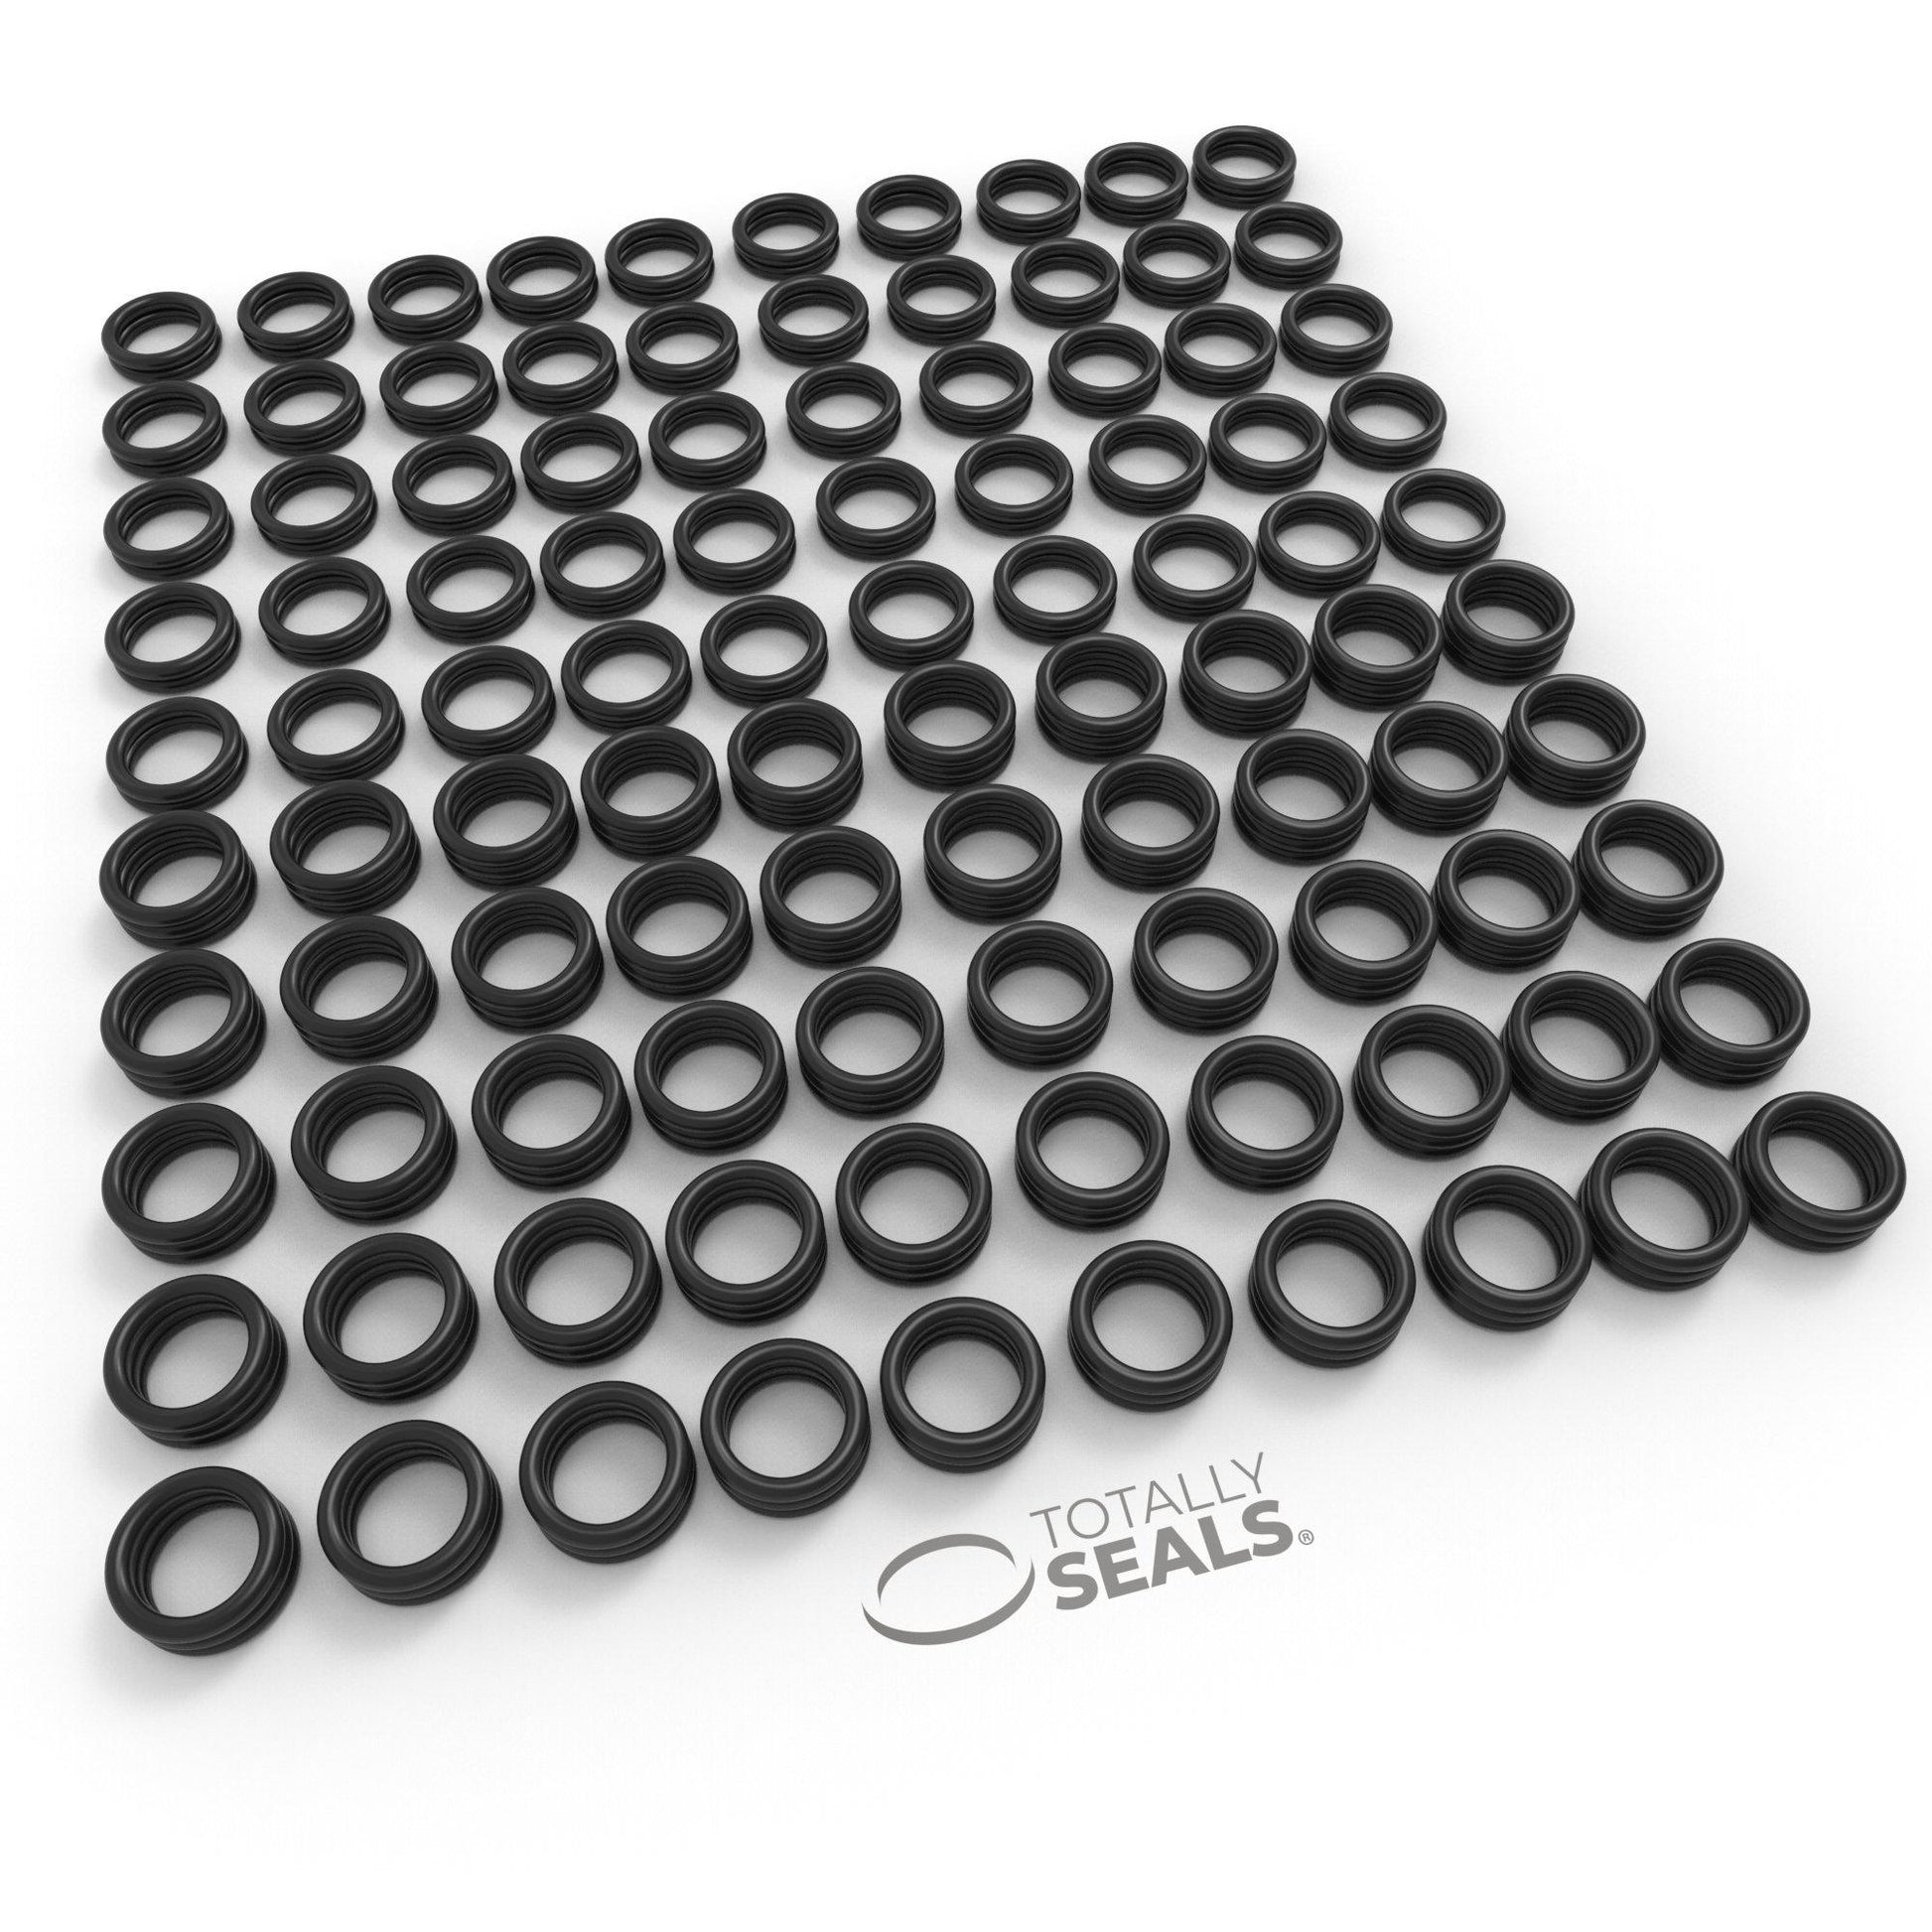 6mm x 2mm (10mm OD) Nitrile O-Rings - Totally Seals®